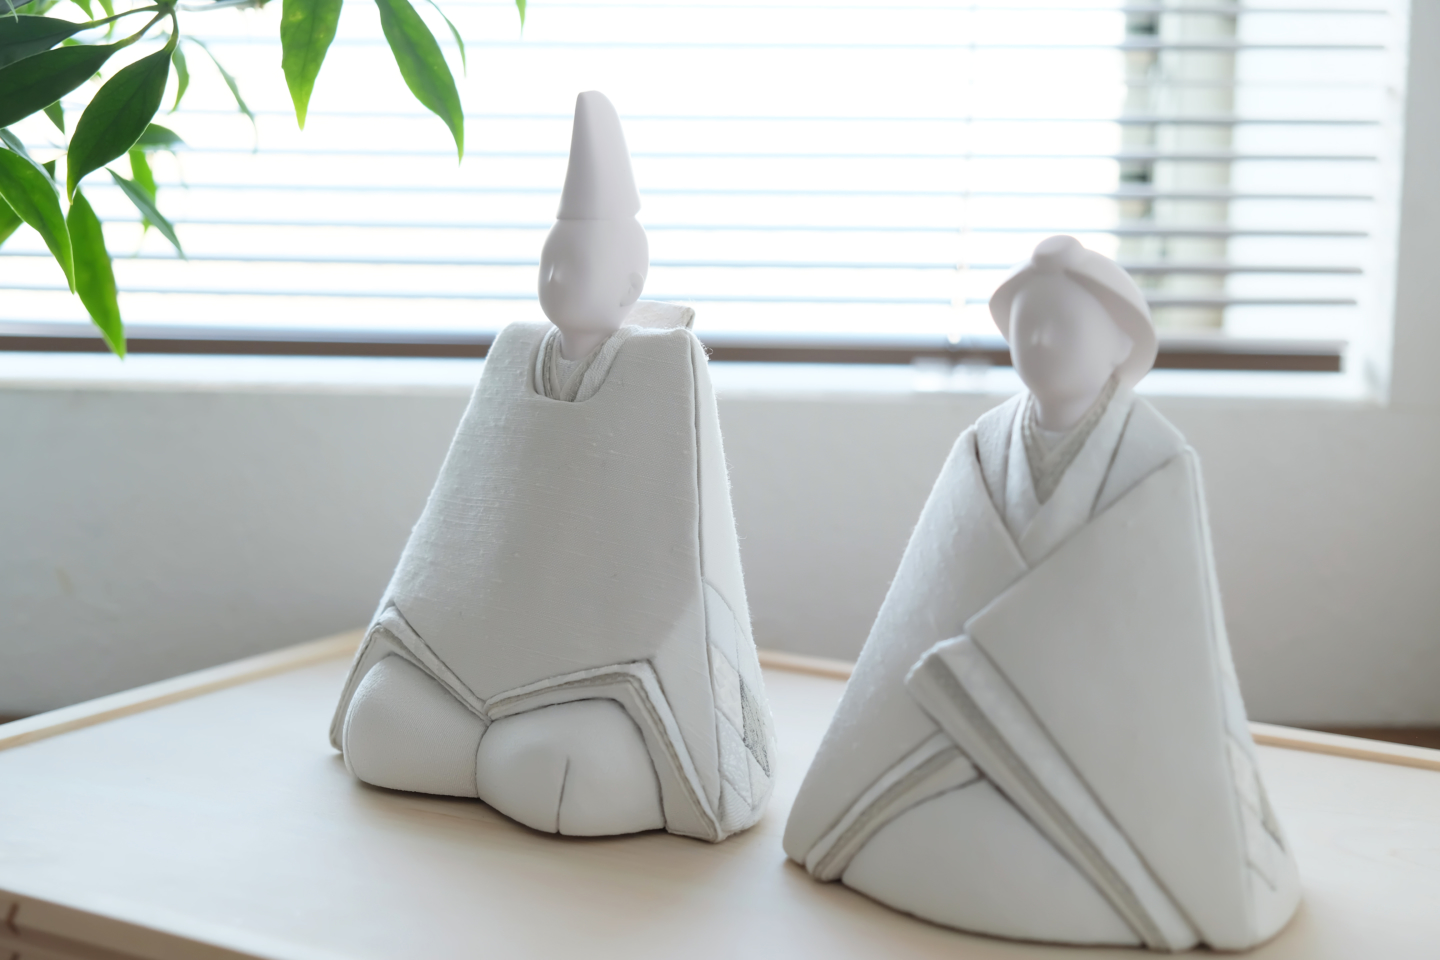 Today’s hina dolls that feature a modern take on Edo chic